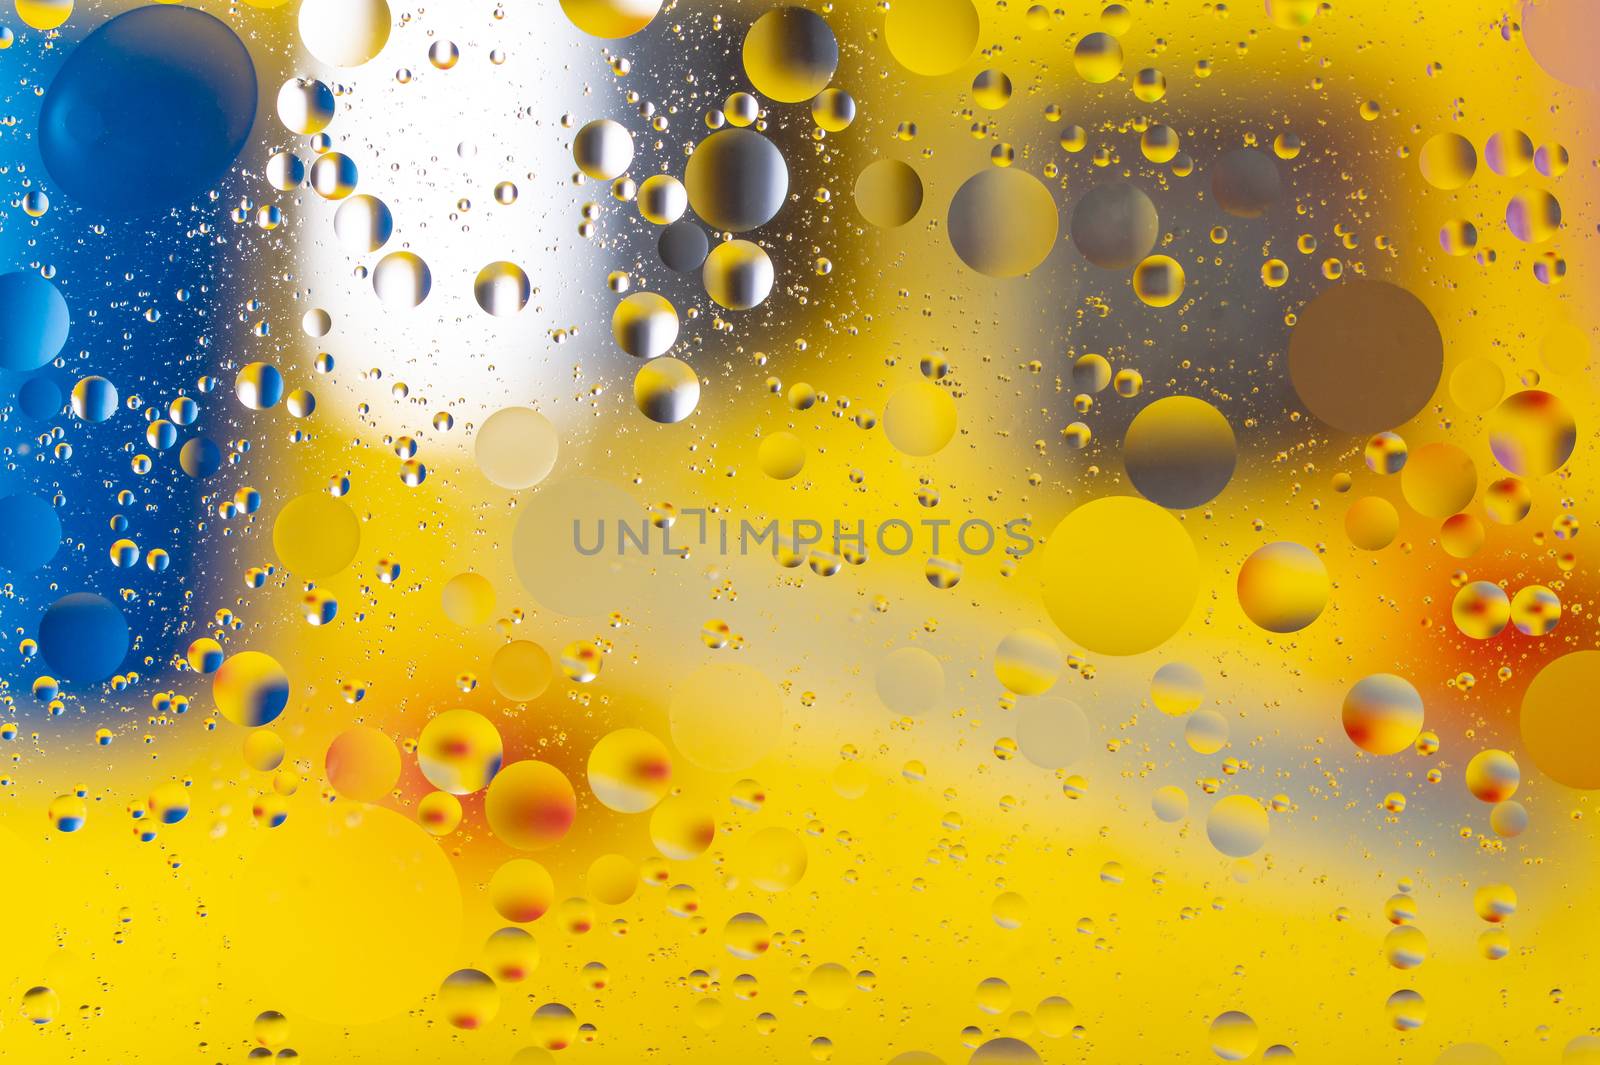 The abstract composition with oil drops in water.  by alexsdriver